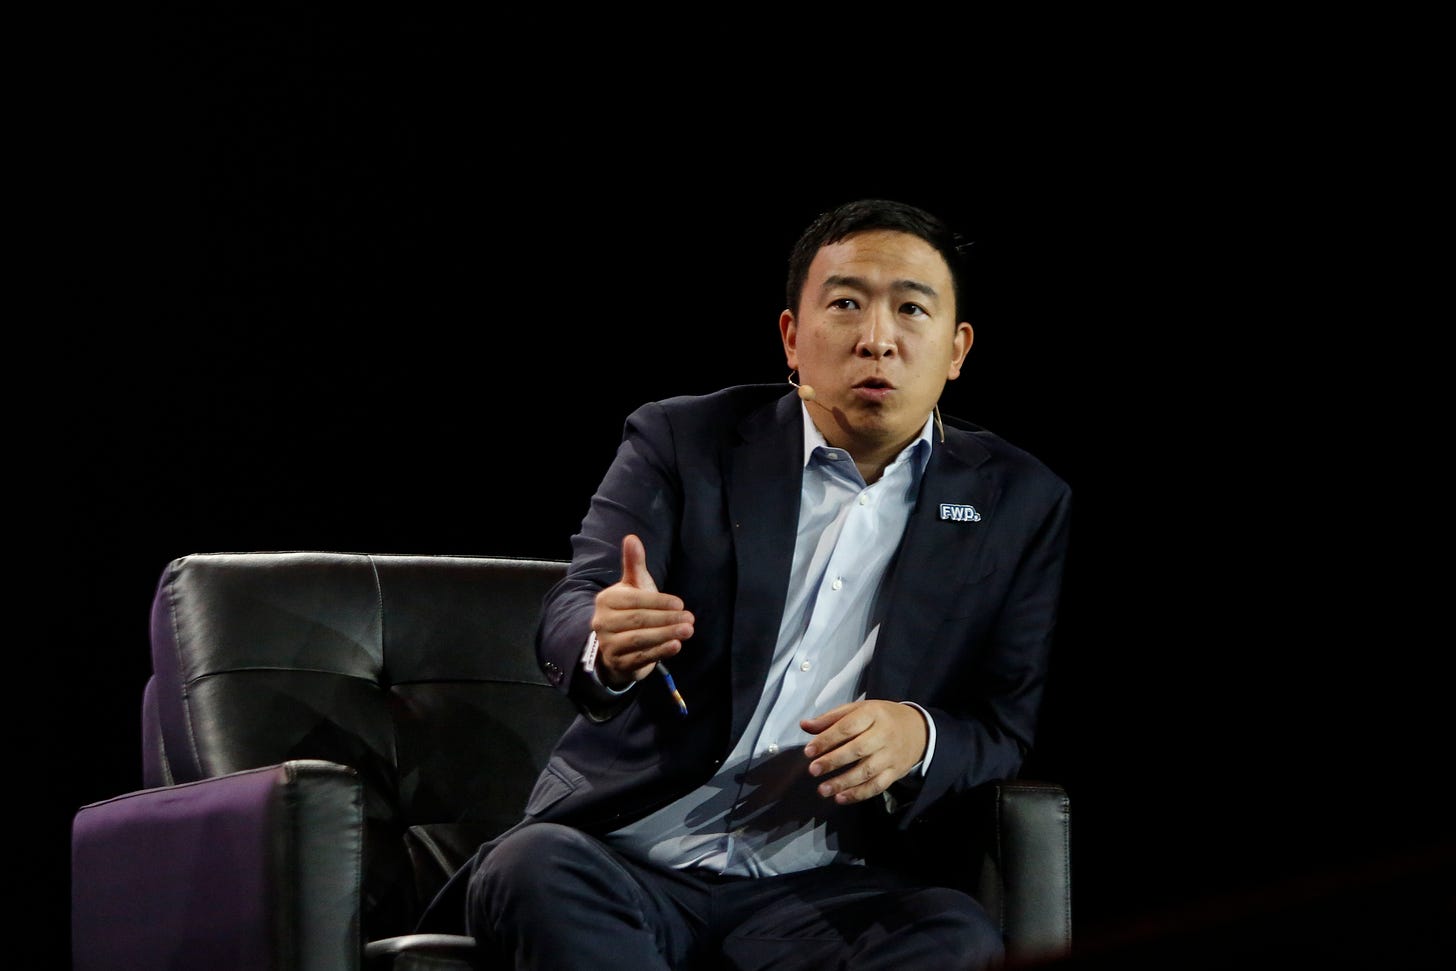 Andrew Yang speaks during the Bitcoin 2022 Conference in Miami, Florida. (Photo by Marco Bello/Getty Images)